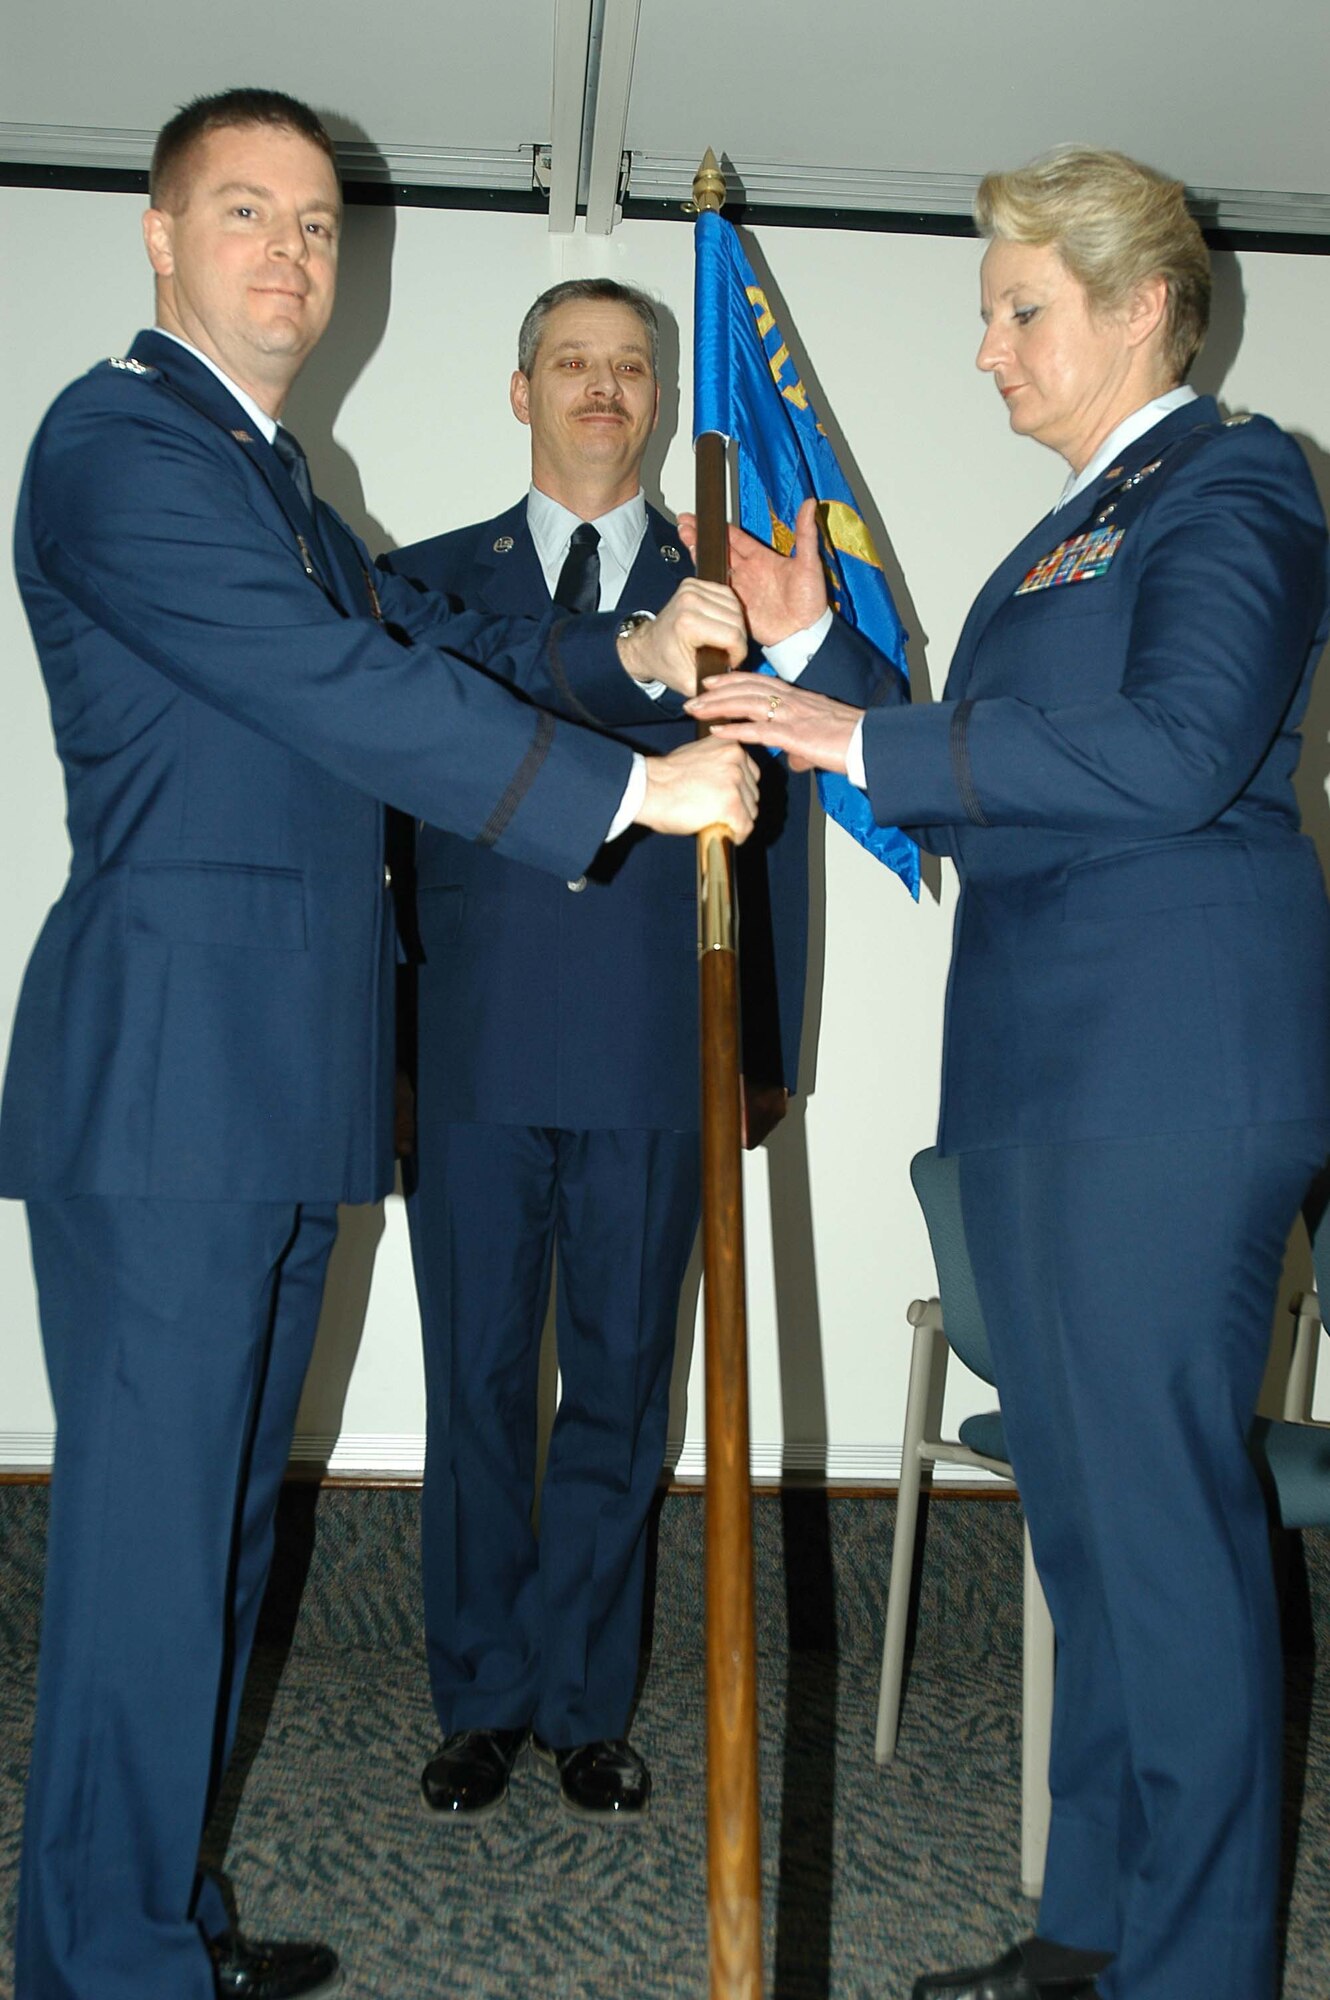 Lt. Col. Jennette Zmaeff accepts the guidon from Col. Frank Amodeo, 911th Operations Group Commander, symbolizing the assumption of command of the 911th Aeromedical Evacuation Squadron, during a ceremony held here January 10, 2009. Lt. Col. Zmaeff comes to the unit from the 446th Aeromedical Evacuation Squadron at McChord Air Force Base, Wash. (U.S. Air Force photo by Senior Airman Roberto Modelo)